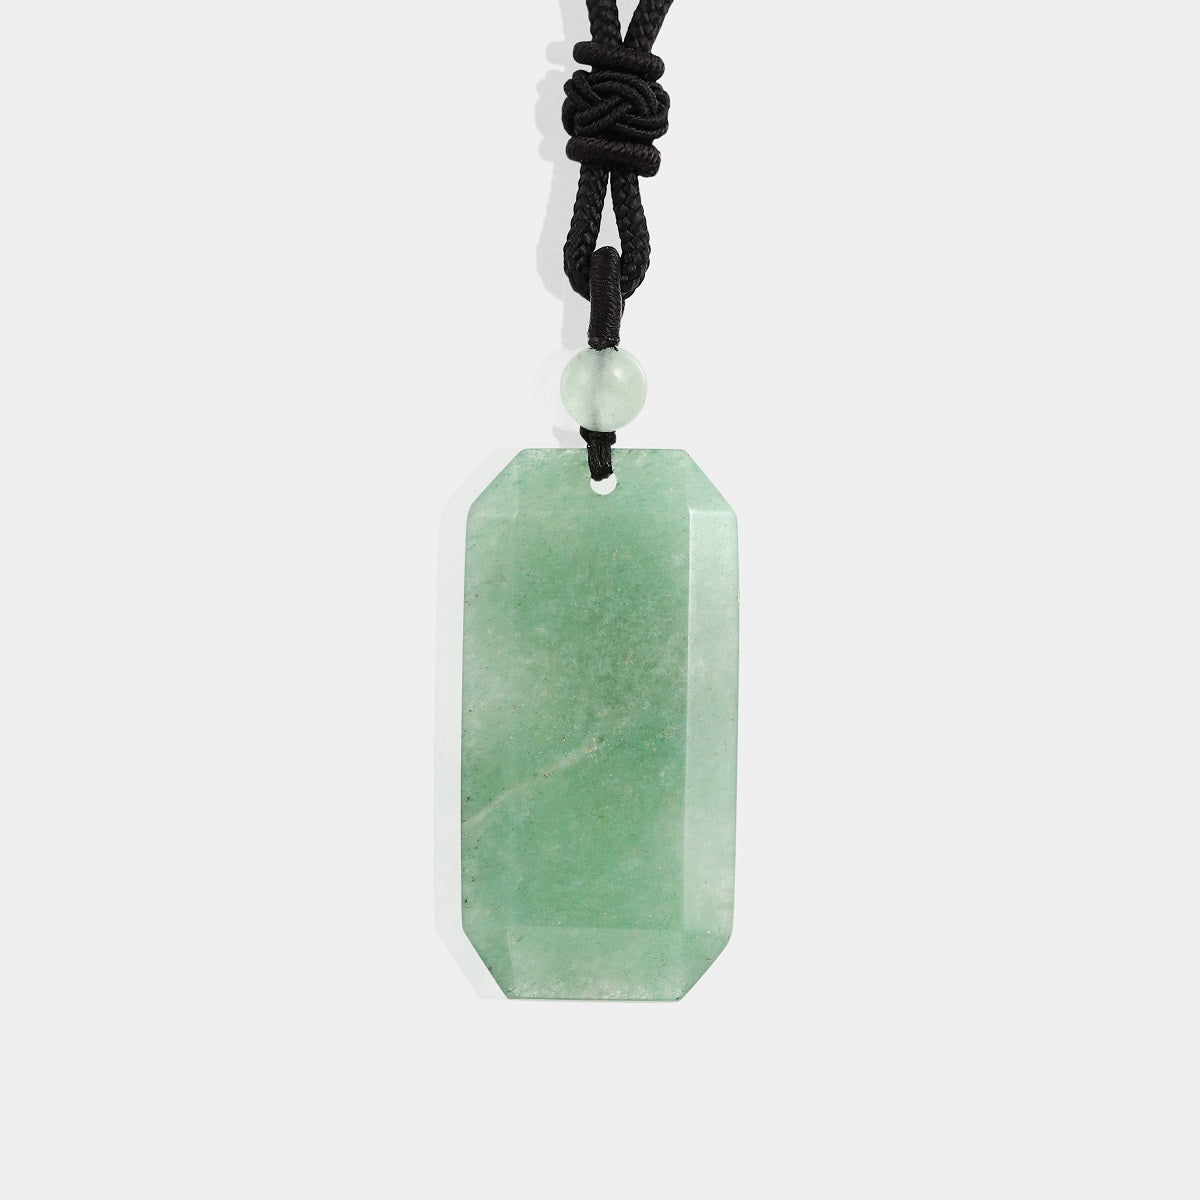 A stunning green aventurine gemstone with a smooth surface, radiating a calming and vibrant green hue.